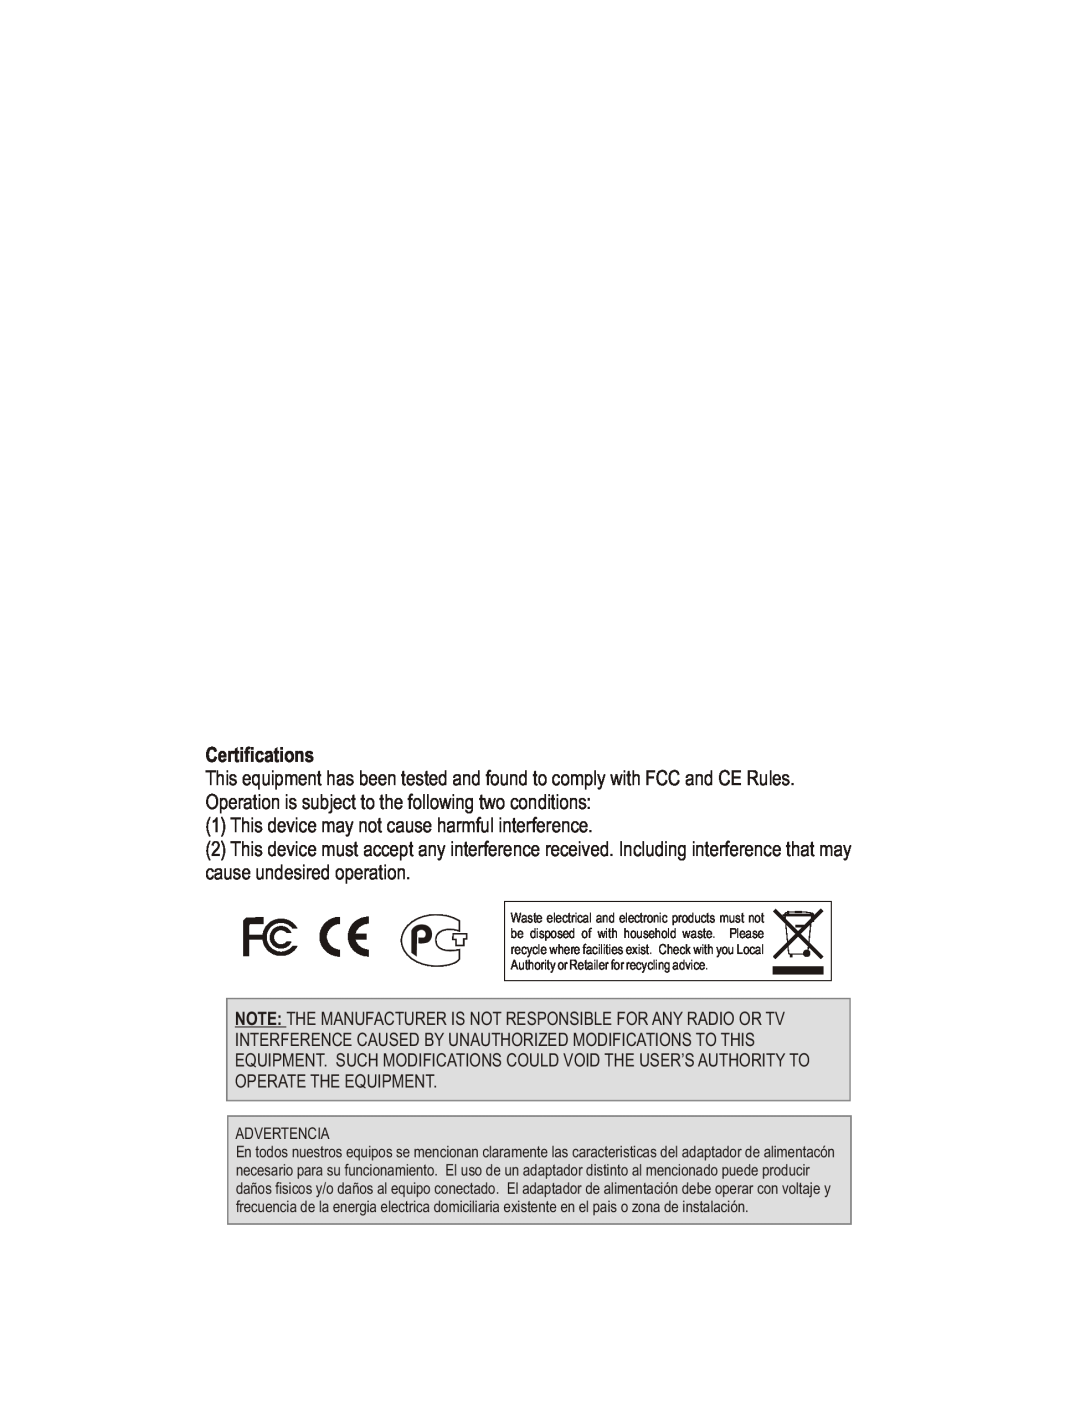 TRENDnet TU-S9 manual Certifications, This device may not cause harmful interference 